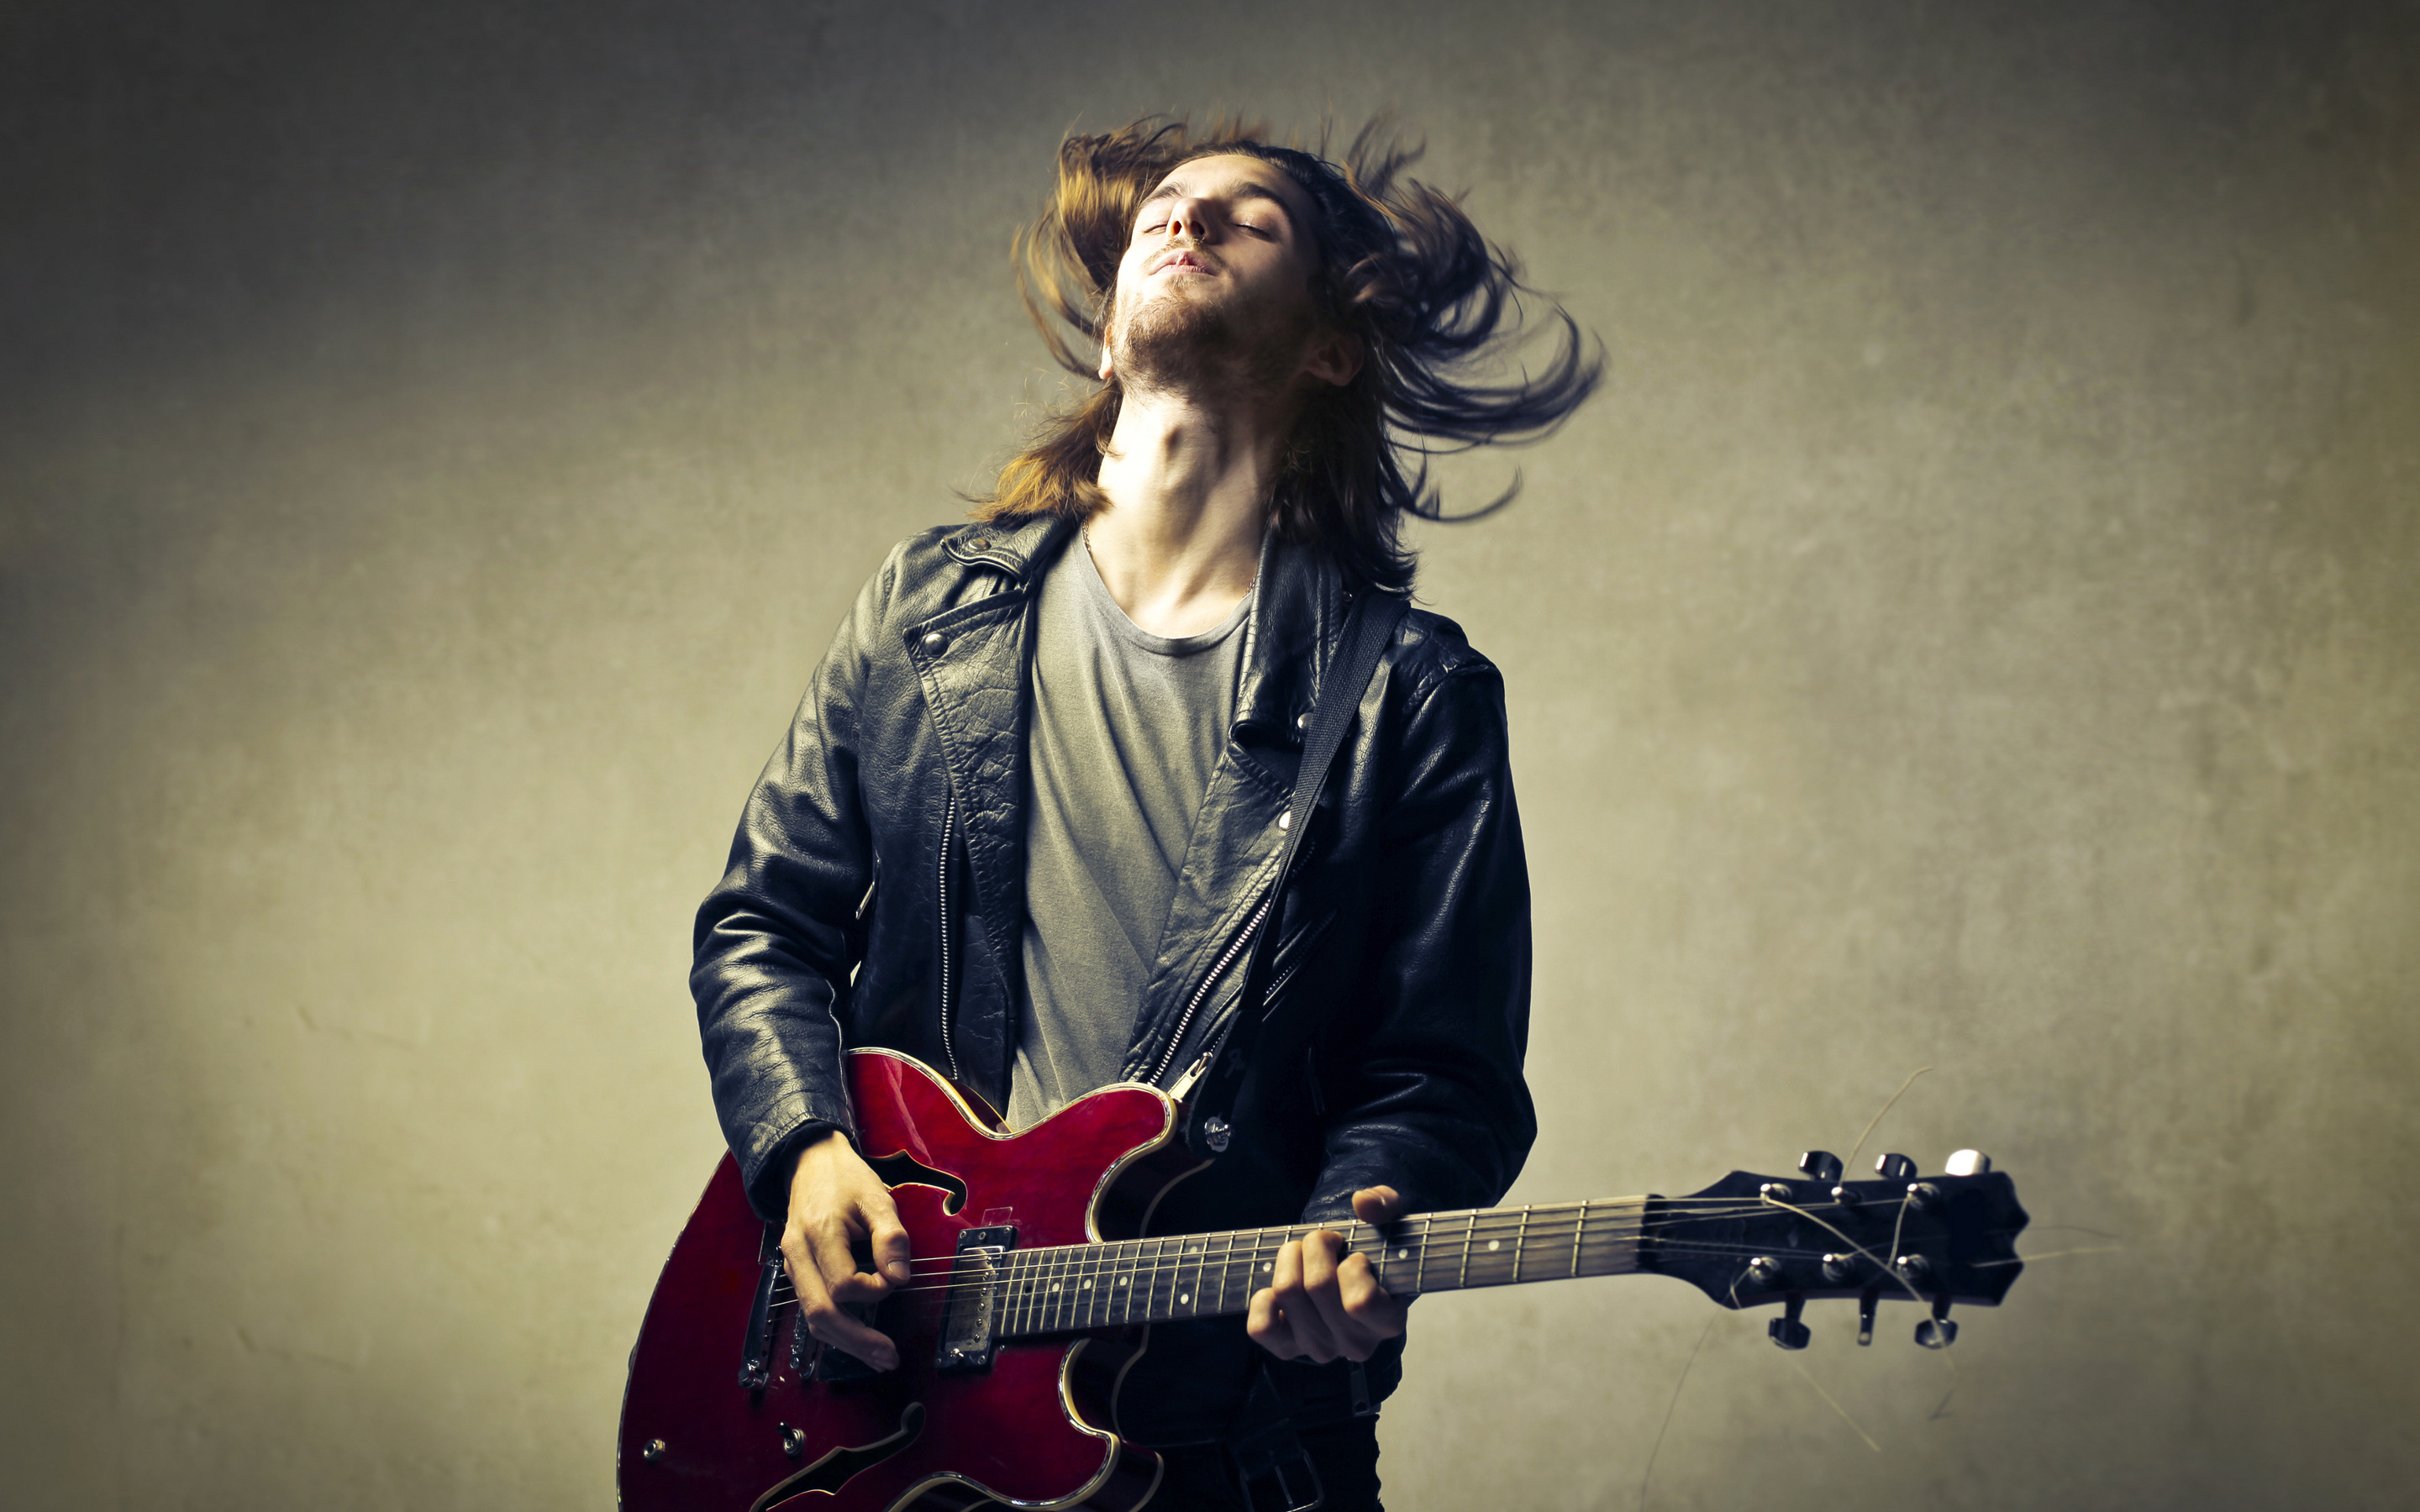 Guitar: Man playing music, Guitar player, A musical instrument with six strings and a long neck. 2880x1800 HD Background.